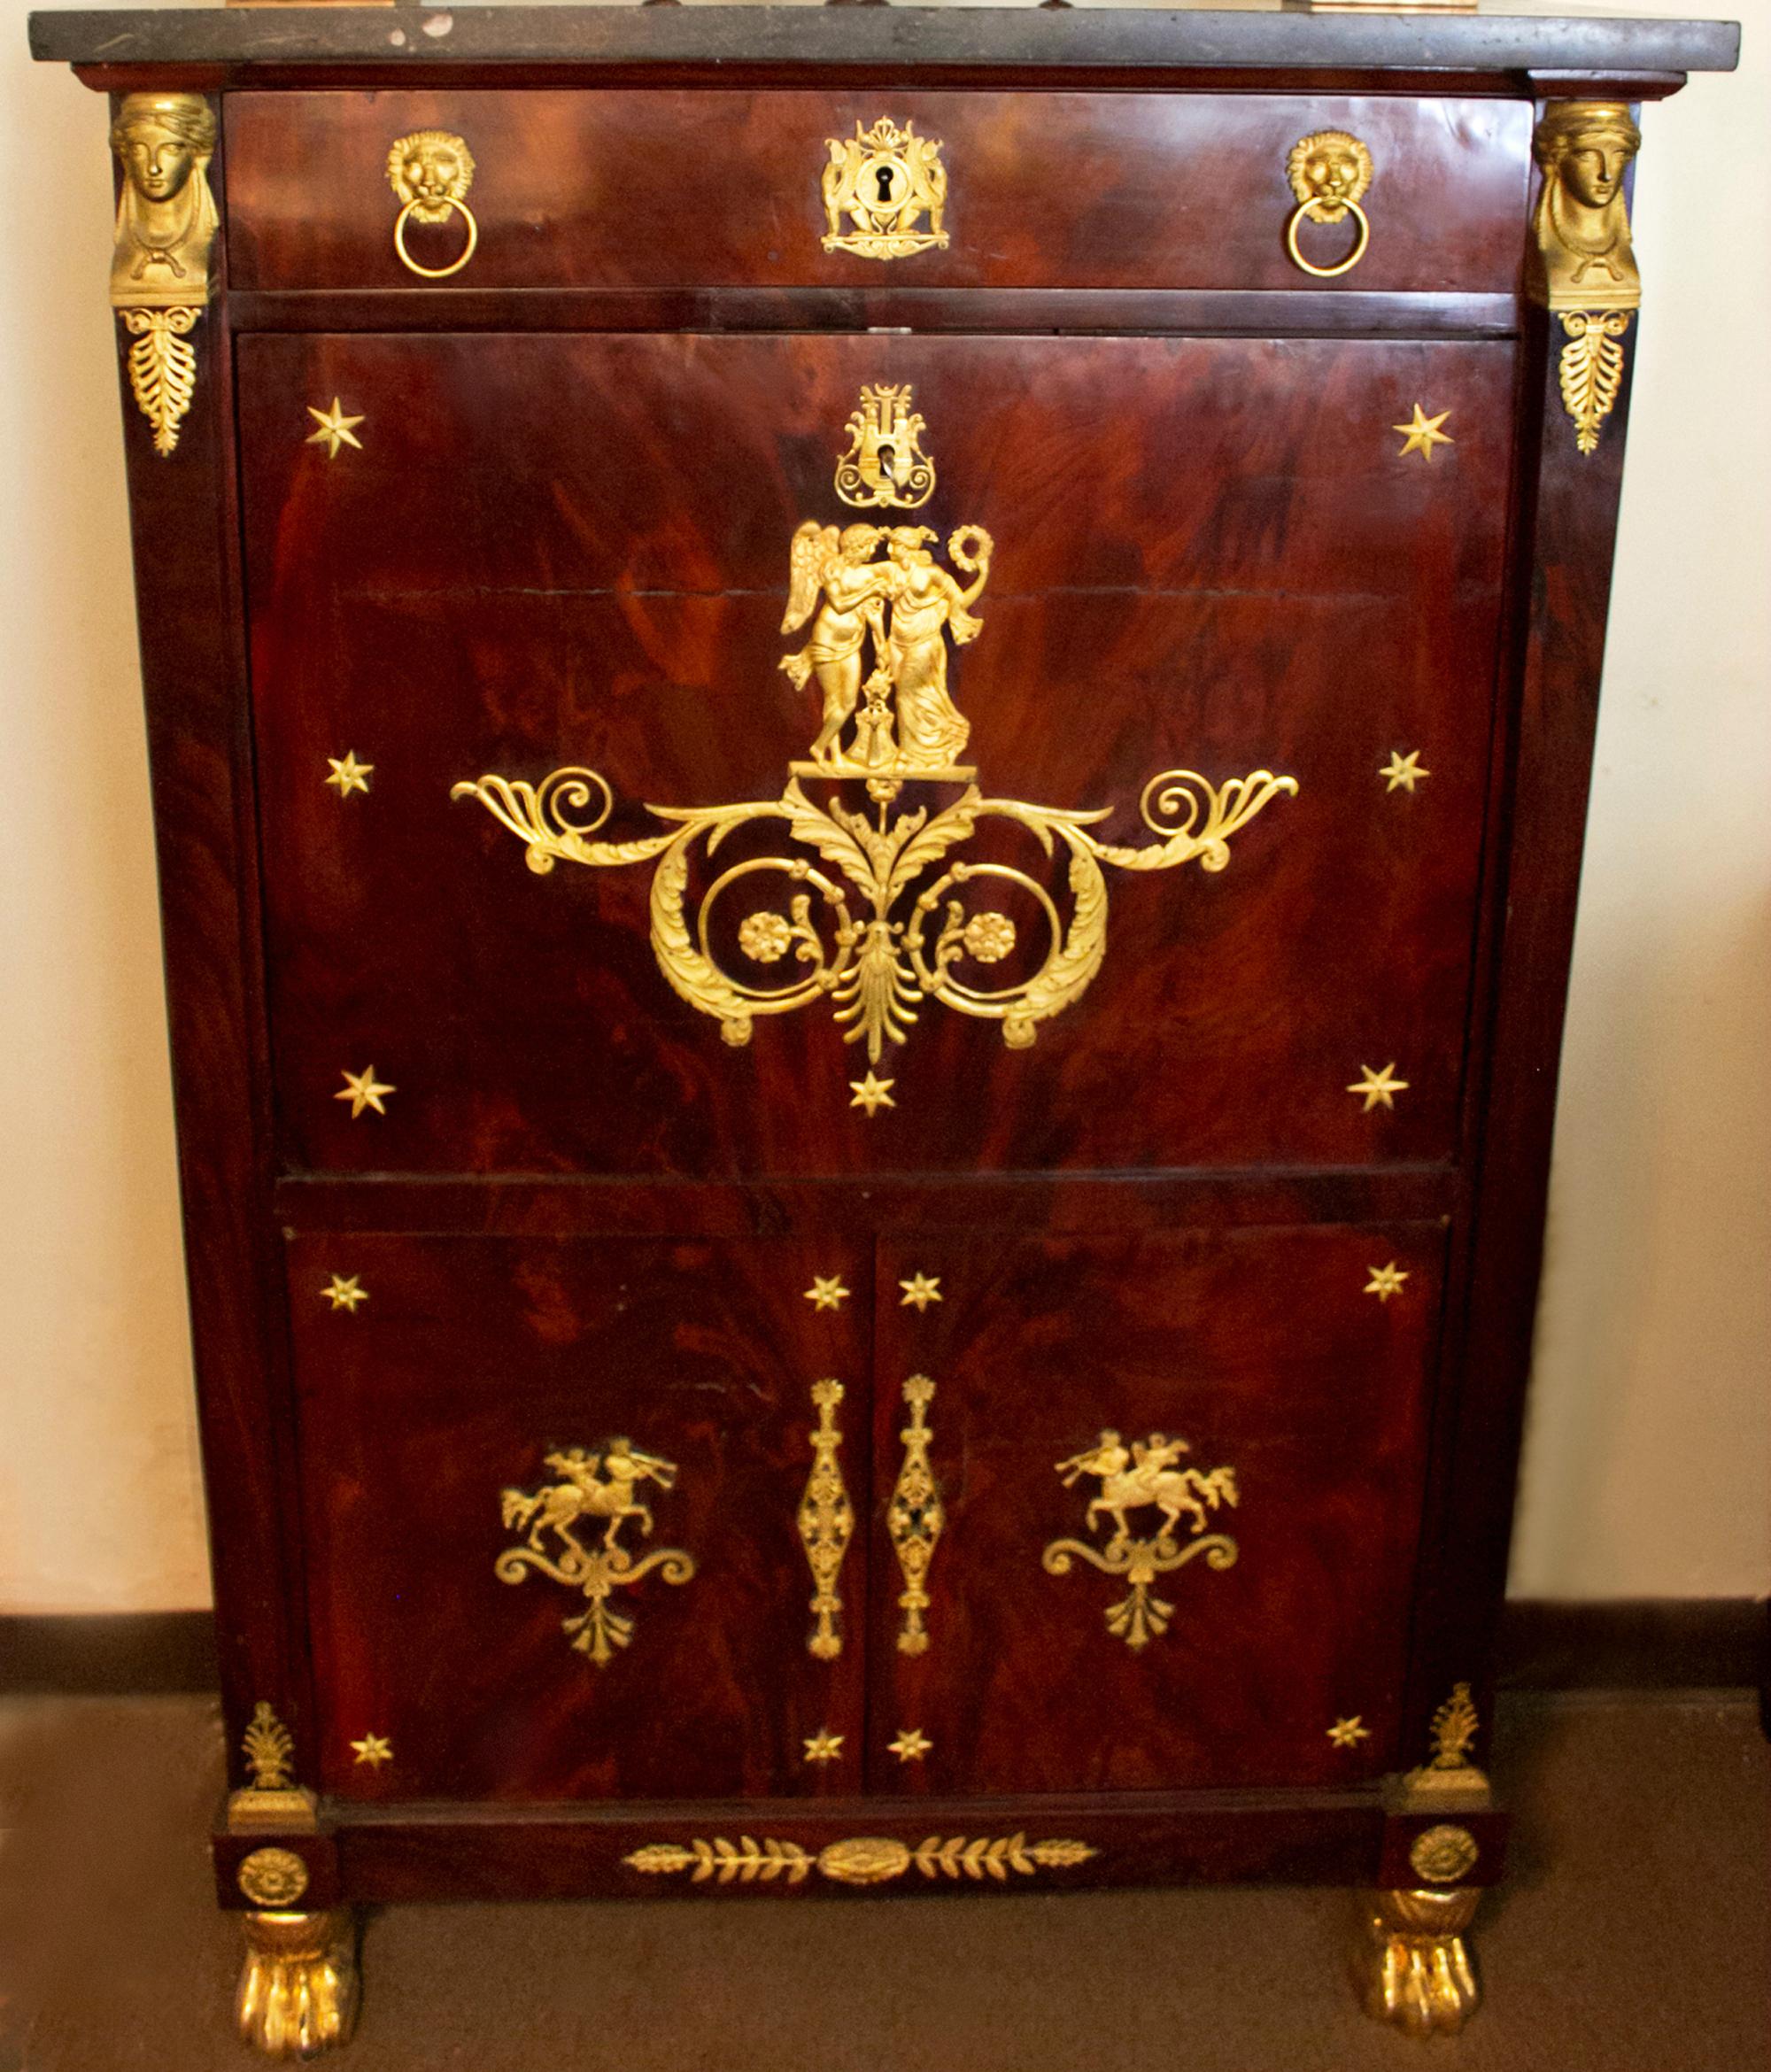 This extraordinary French Second Empire period secre´taire a' abattan features flame mahogany, gilt brass-mounts and retains its original dark grey speckled granite top. Decorated throughout with the original ormolu neoclassical motif, the facade is